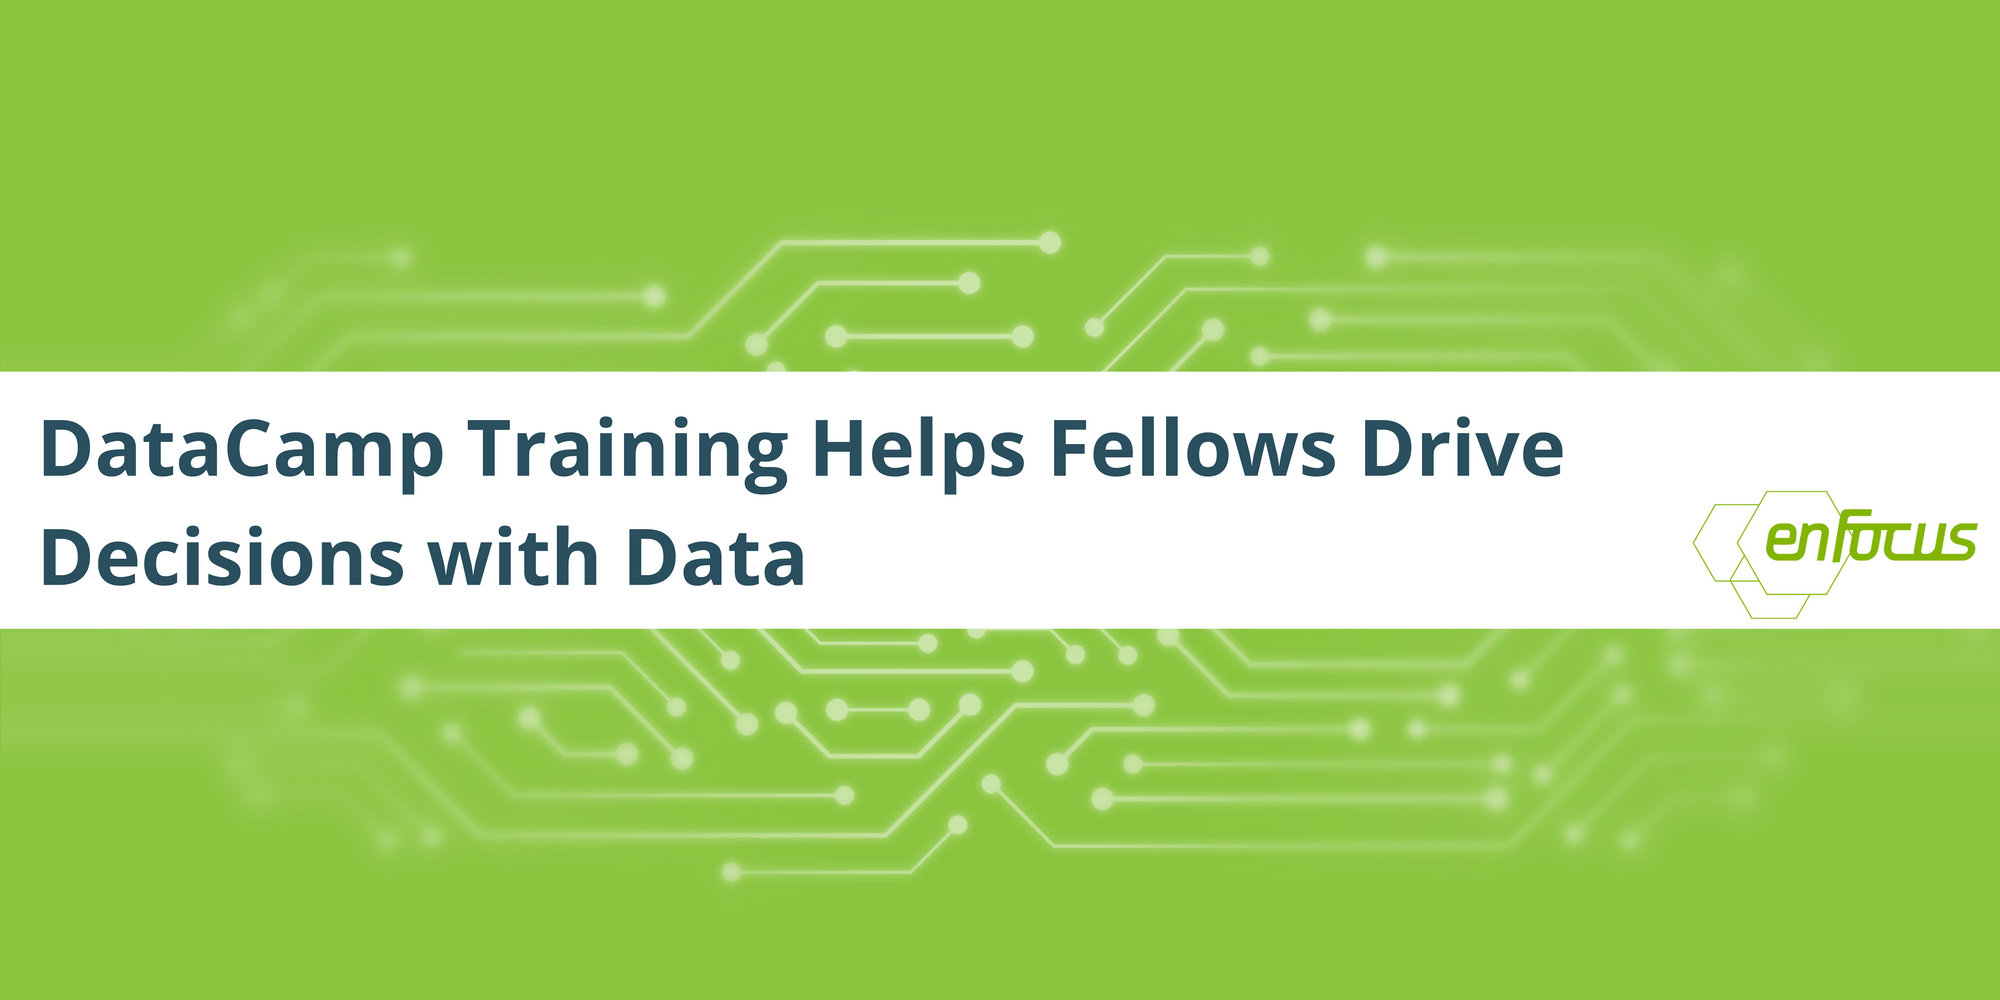 DataCamp Training Helps Fellows Drive Decisions with Data